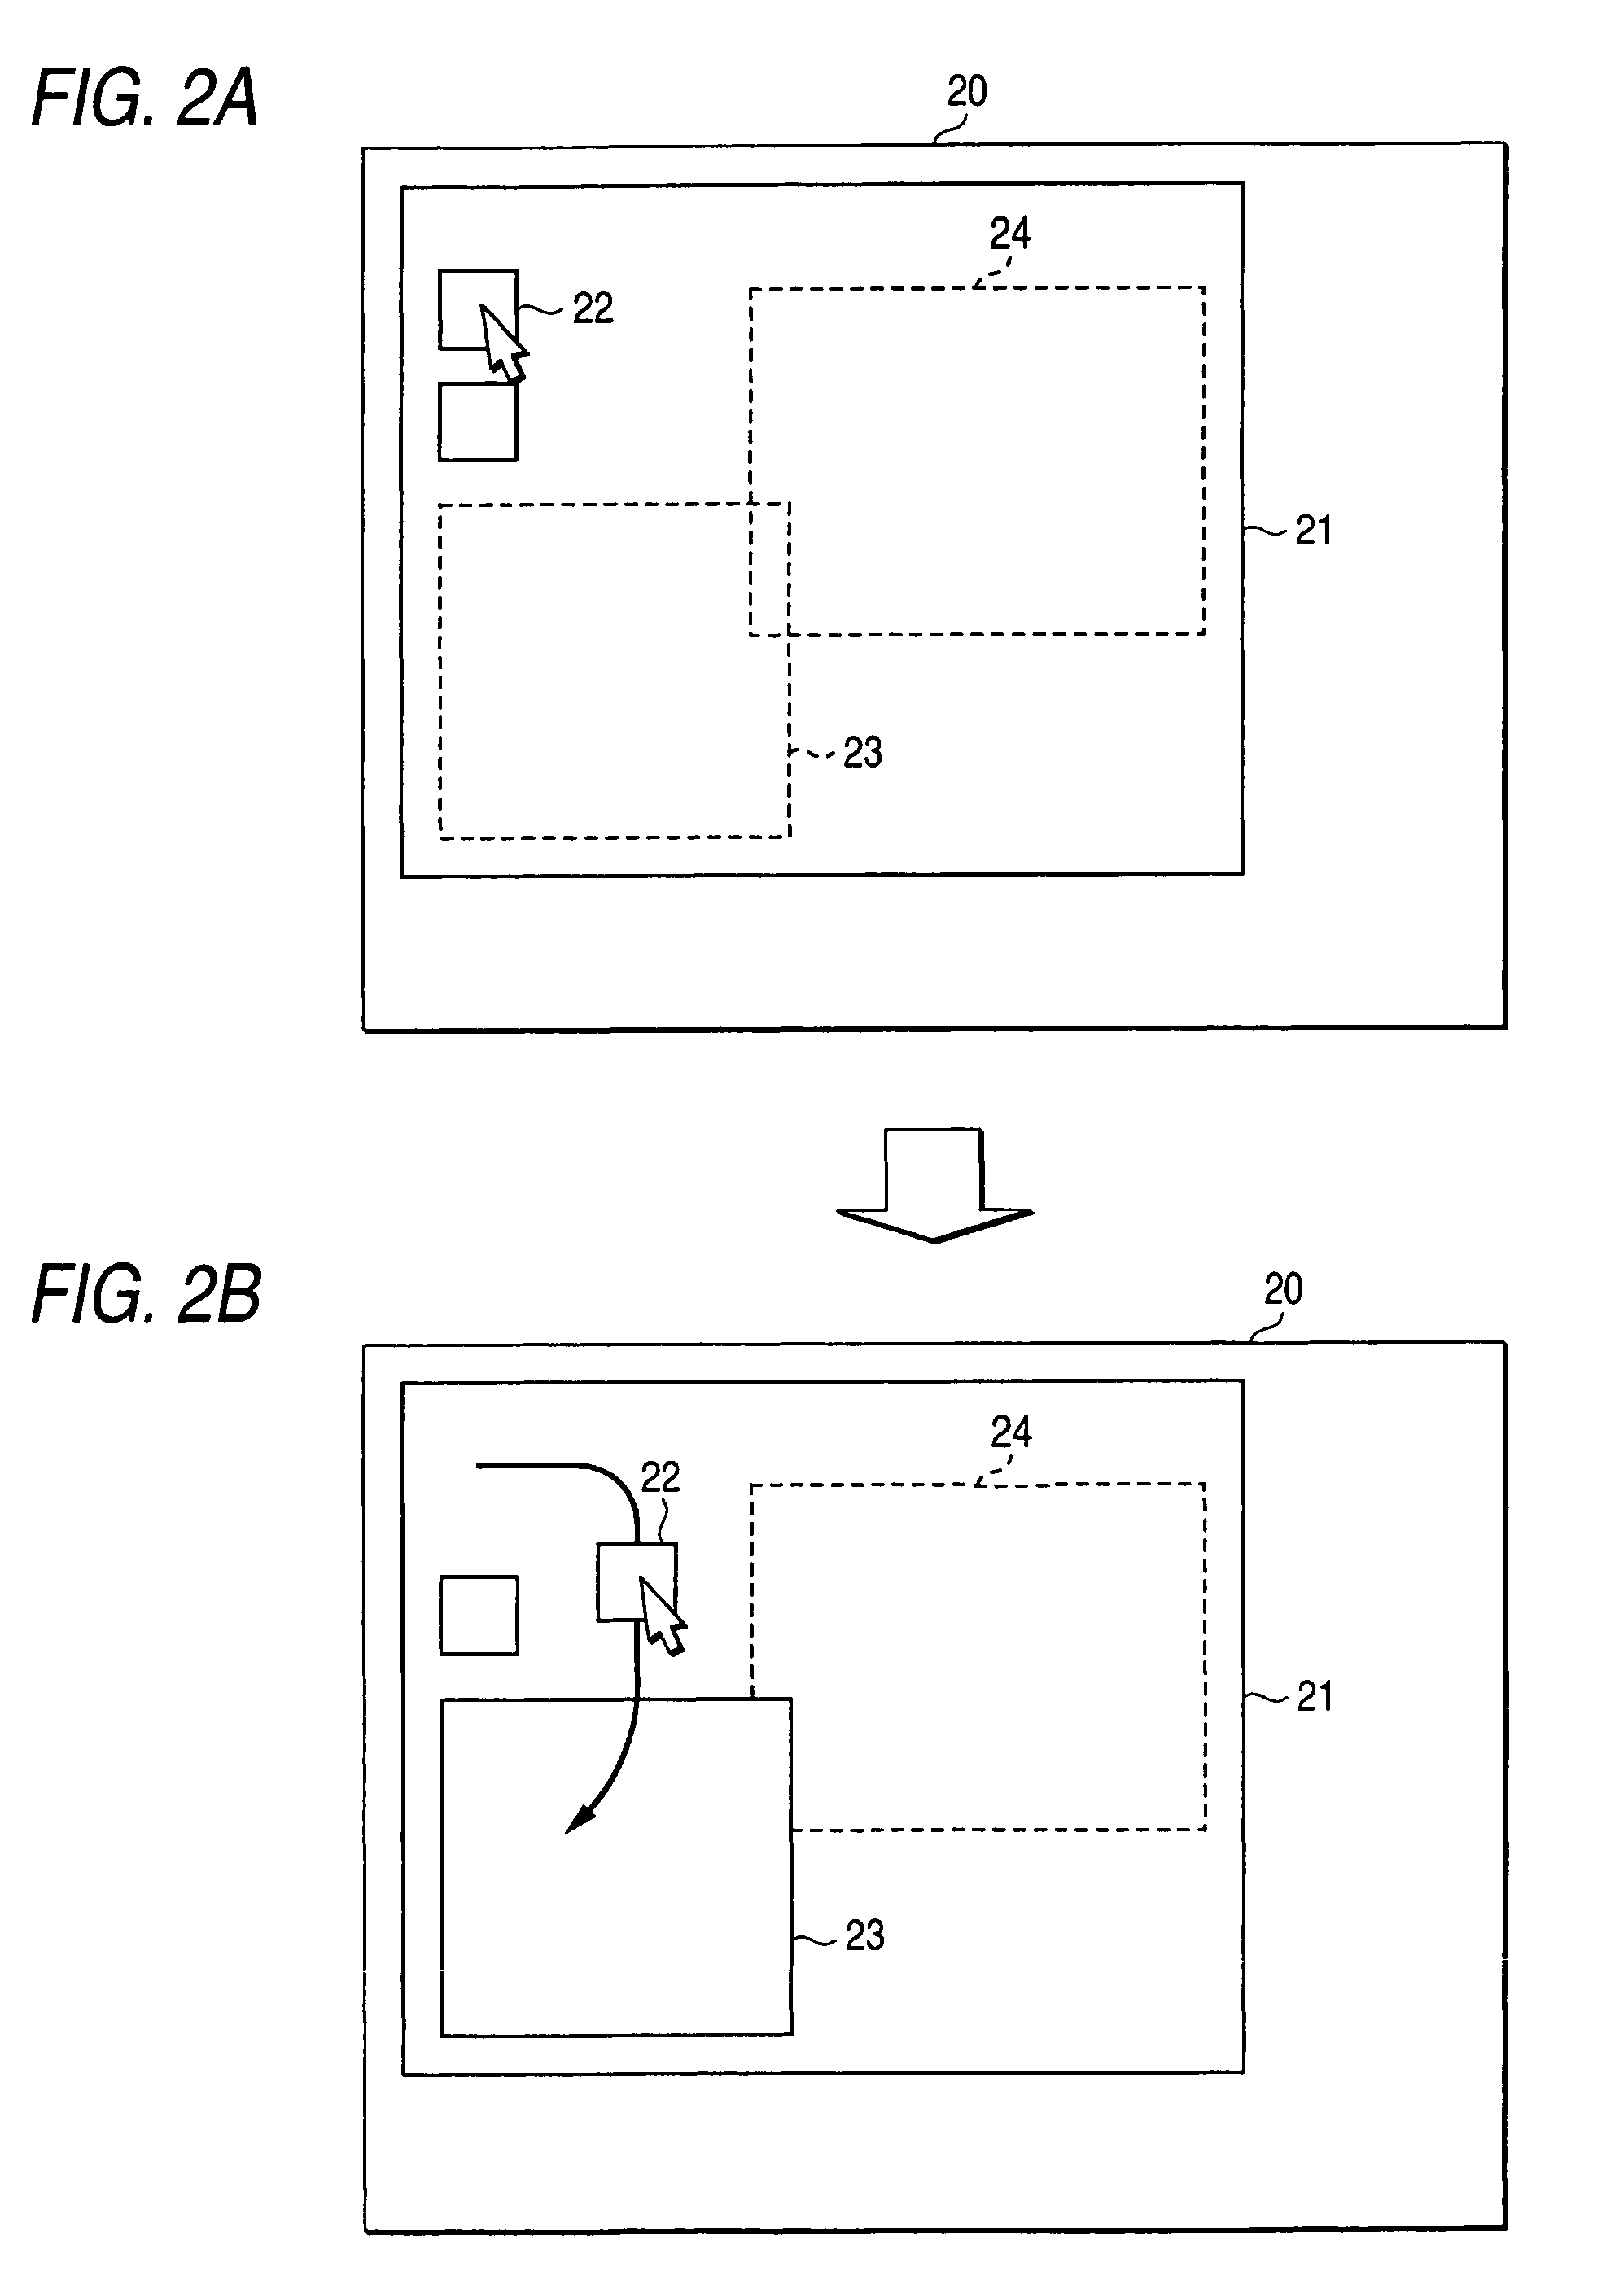 Display control method and display control processing system for concealed window on desktop